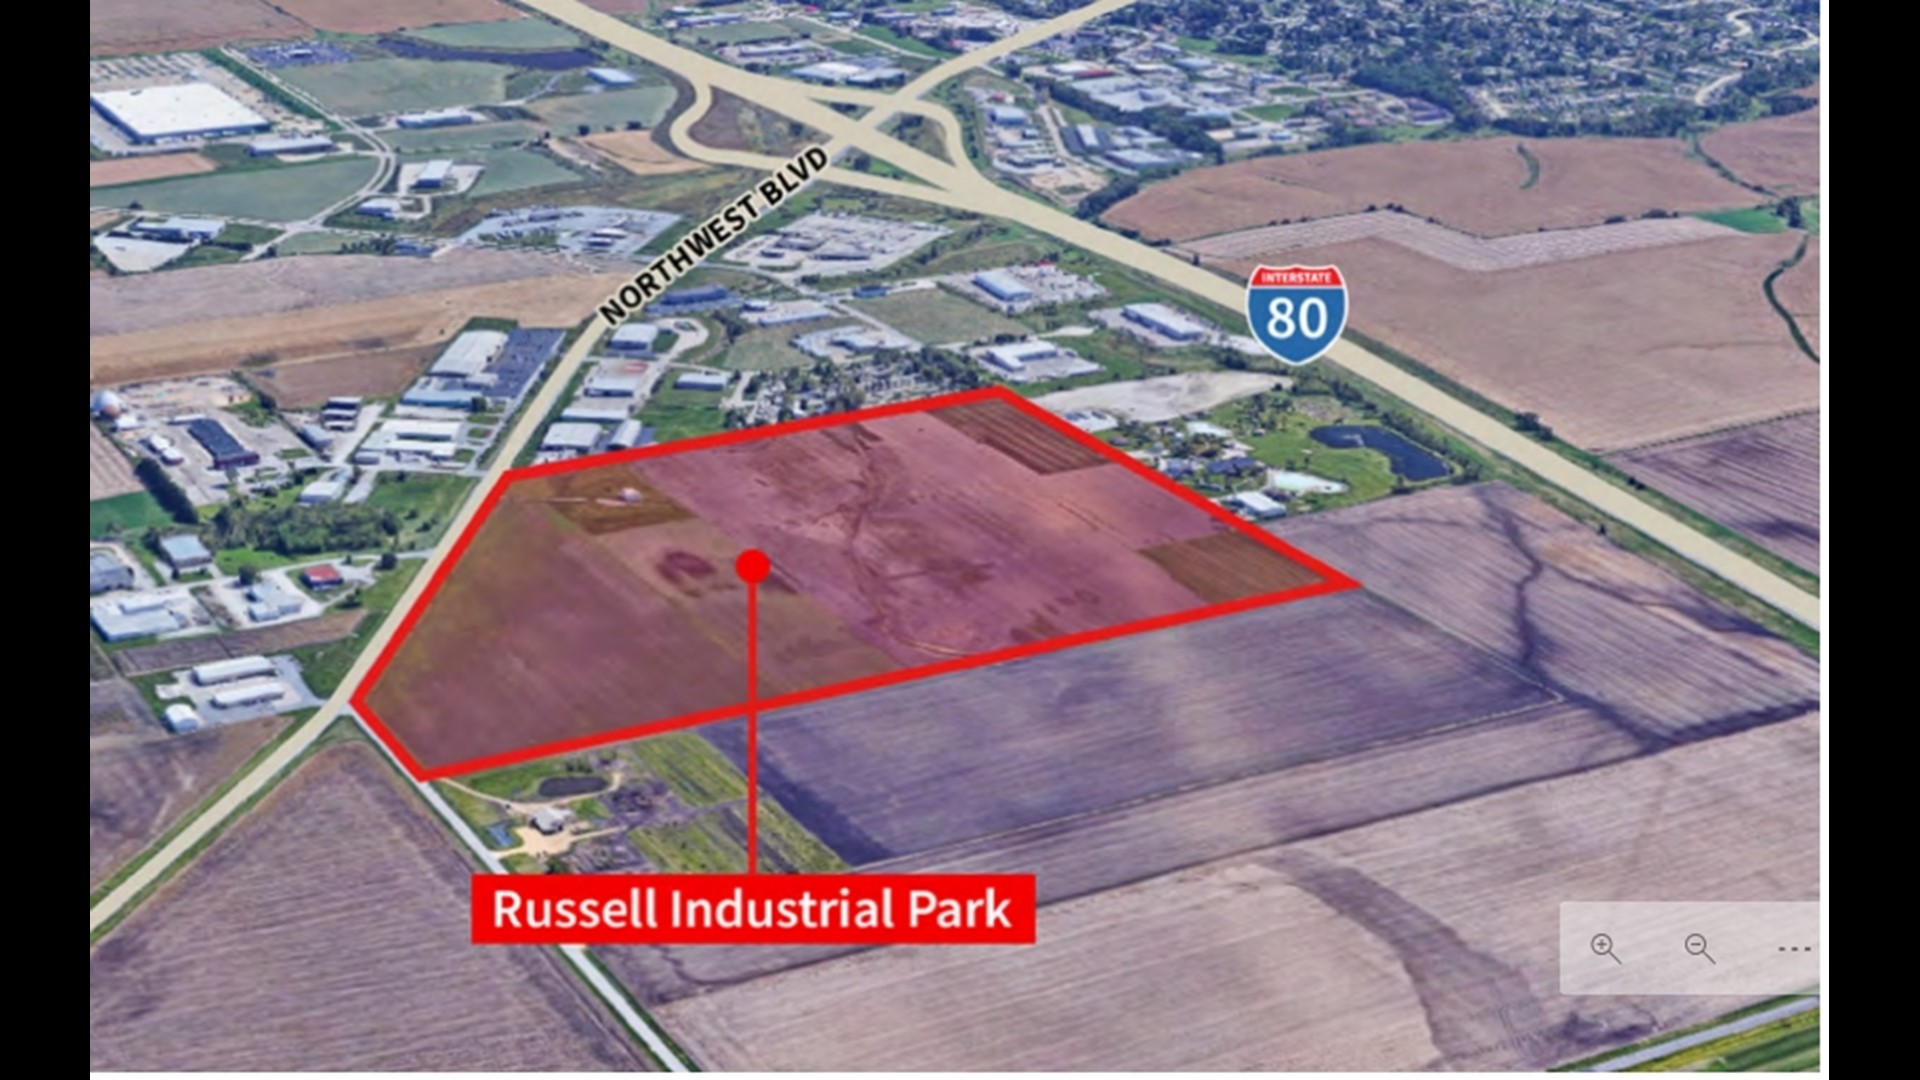 The Russell Industrial Park consists of six projects in Davenport, north of Interstate 80